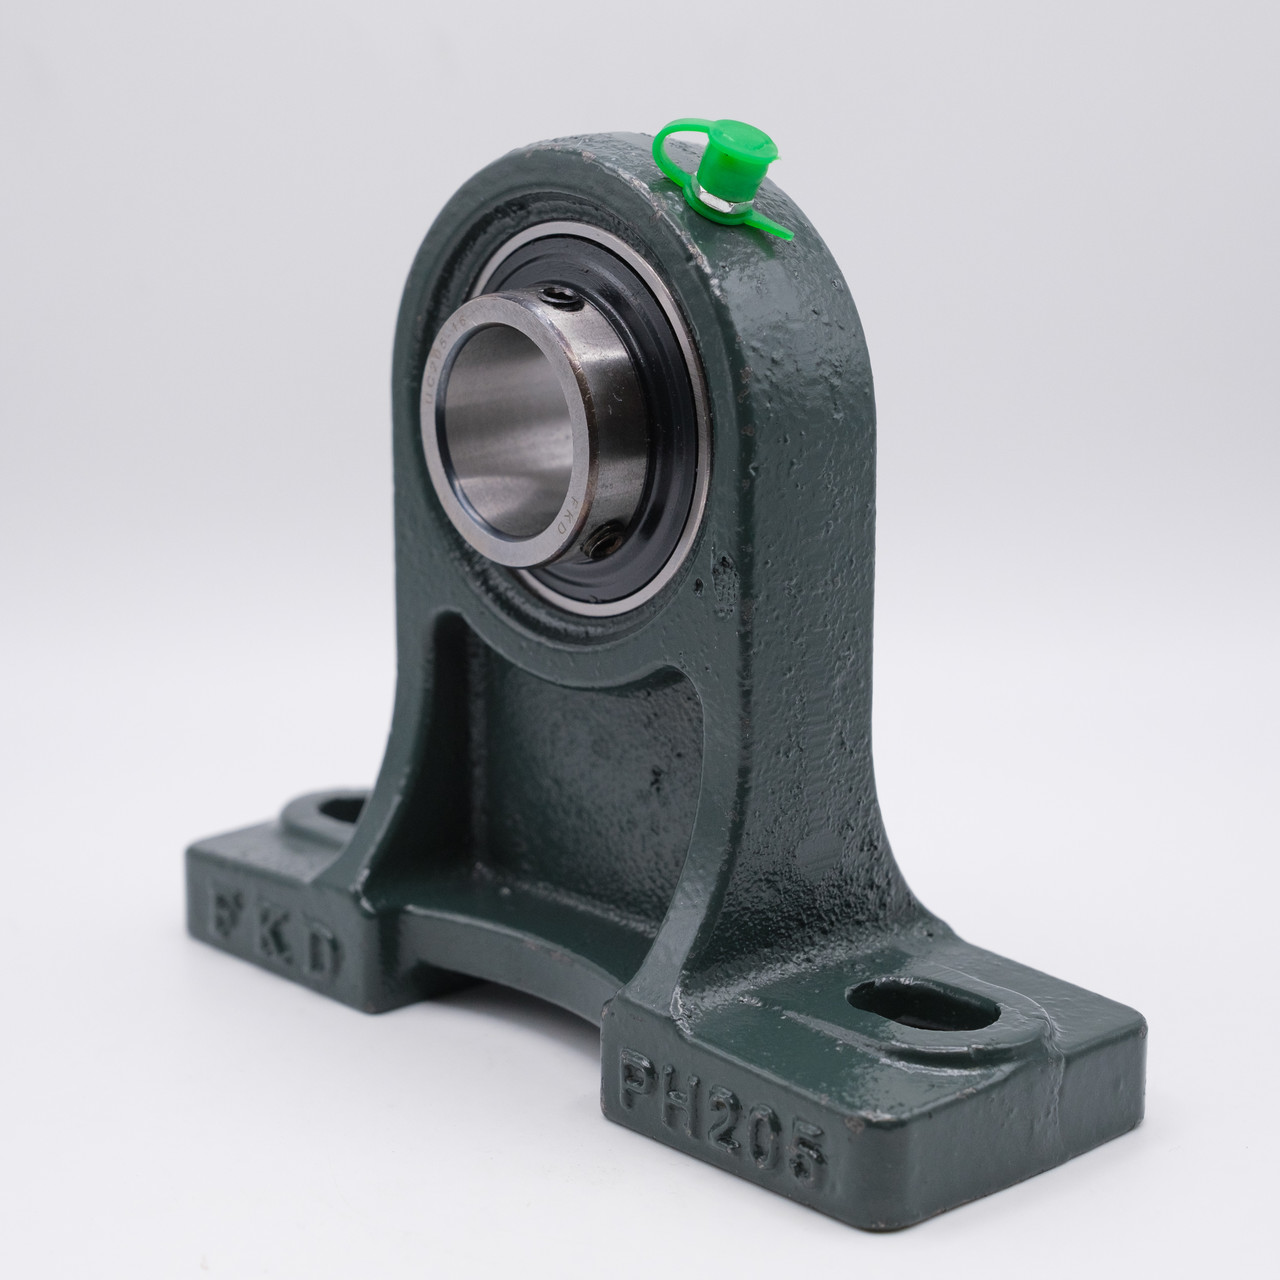 UCPH209 GENERIC 45mm Normal duty 2 Bolt Cast Iron Pillow Block Housed Unit Bearing with extended base to centre height - Metric Thumbnail